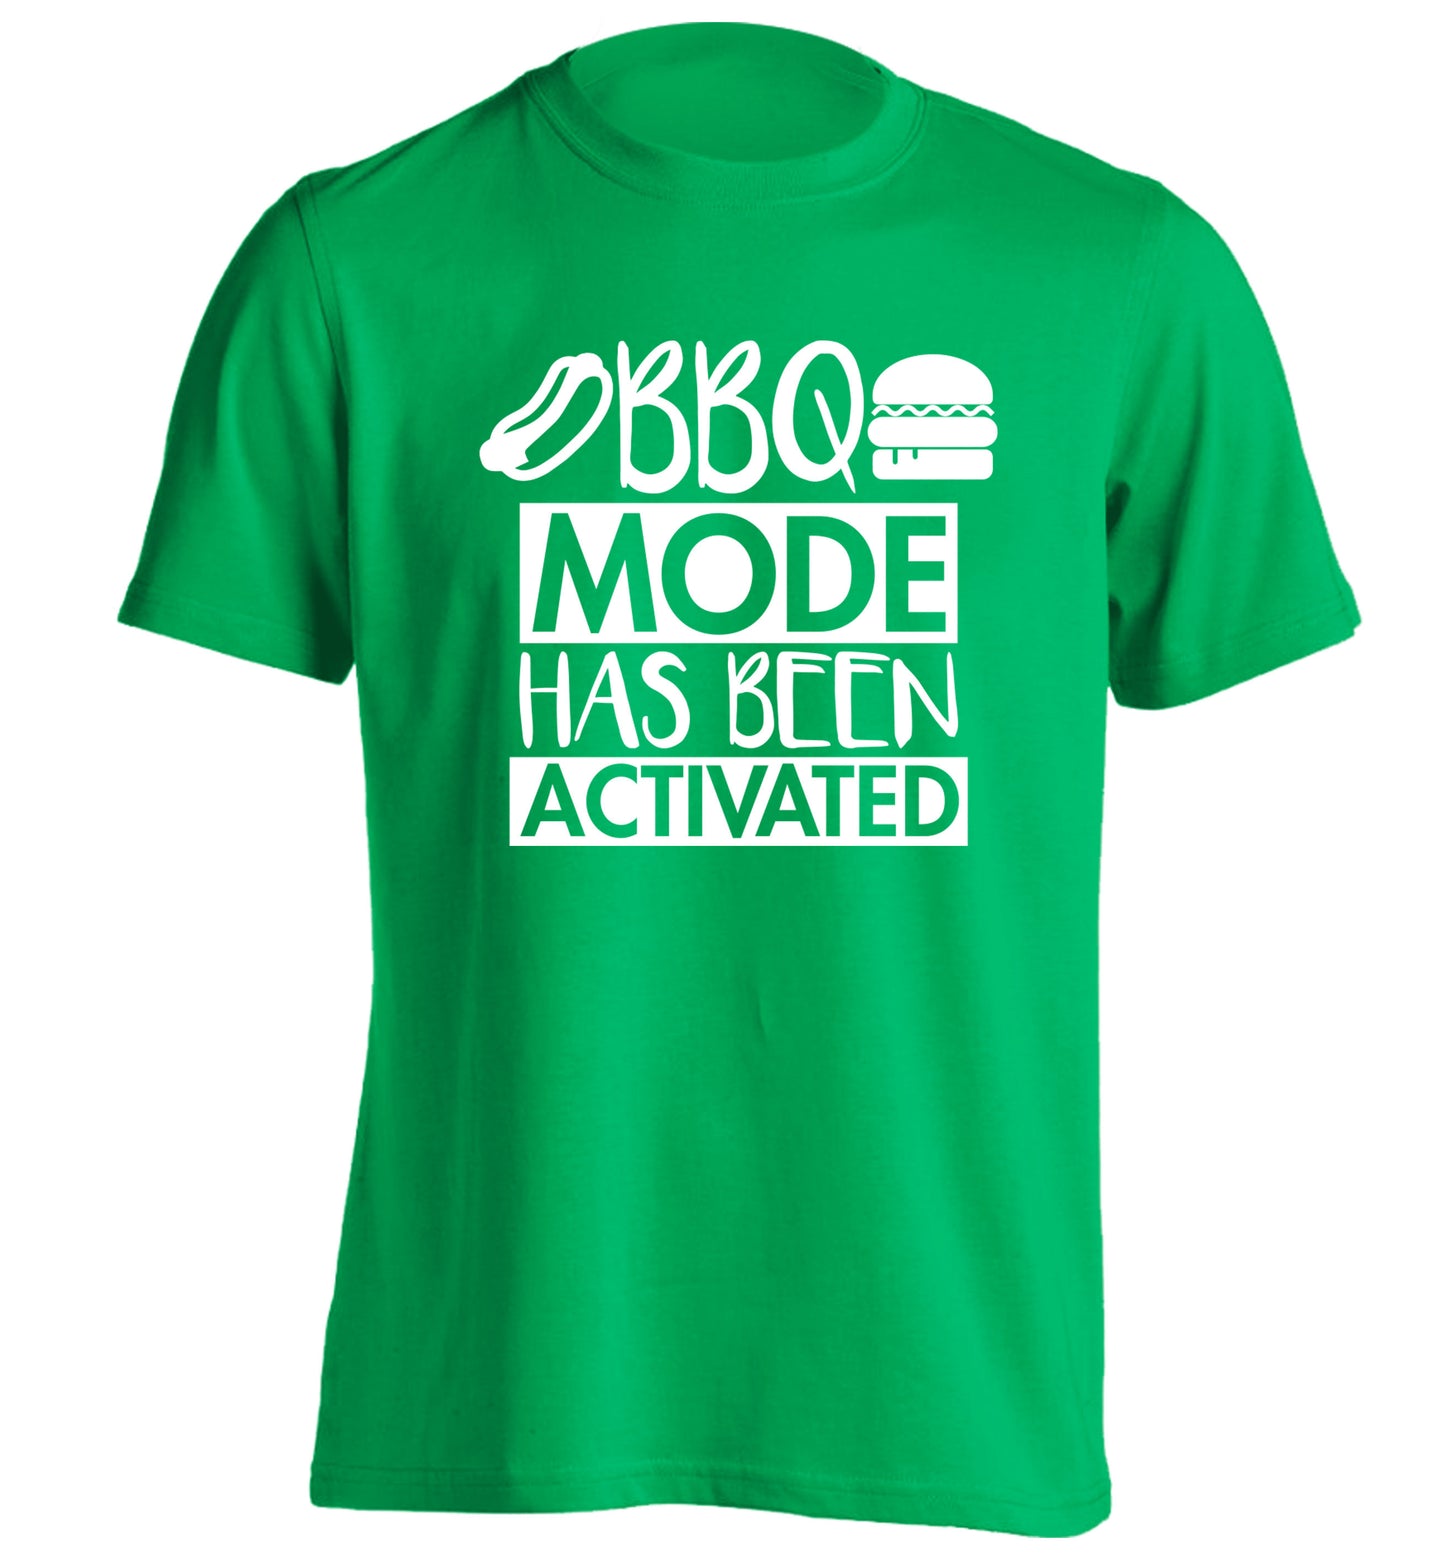 Bbq mode has been activated adults unisex green Tshirt 2XL